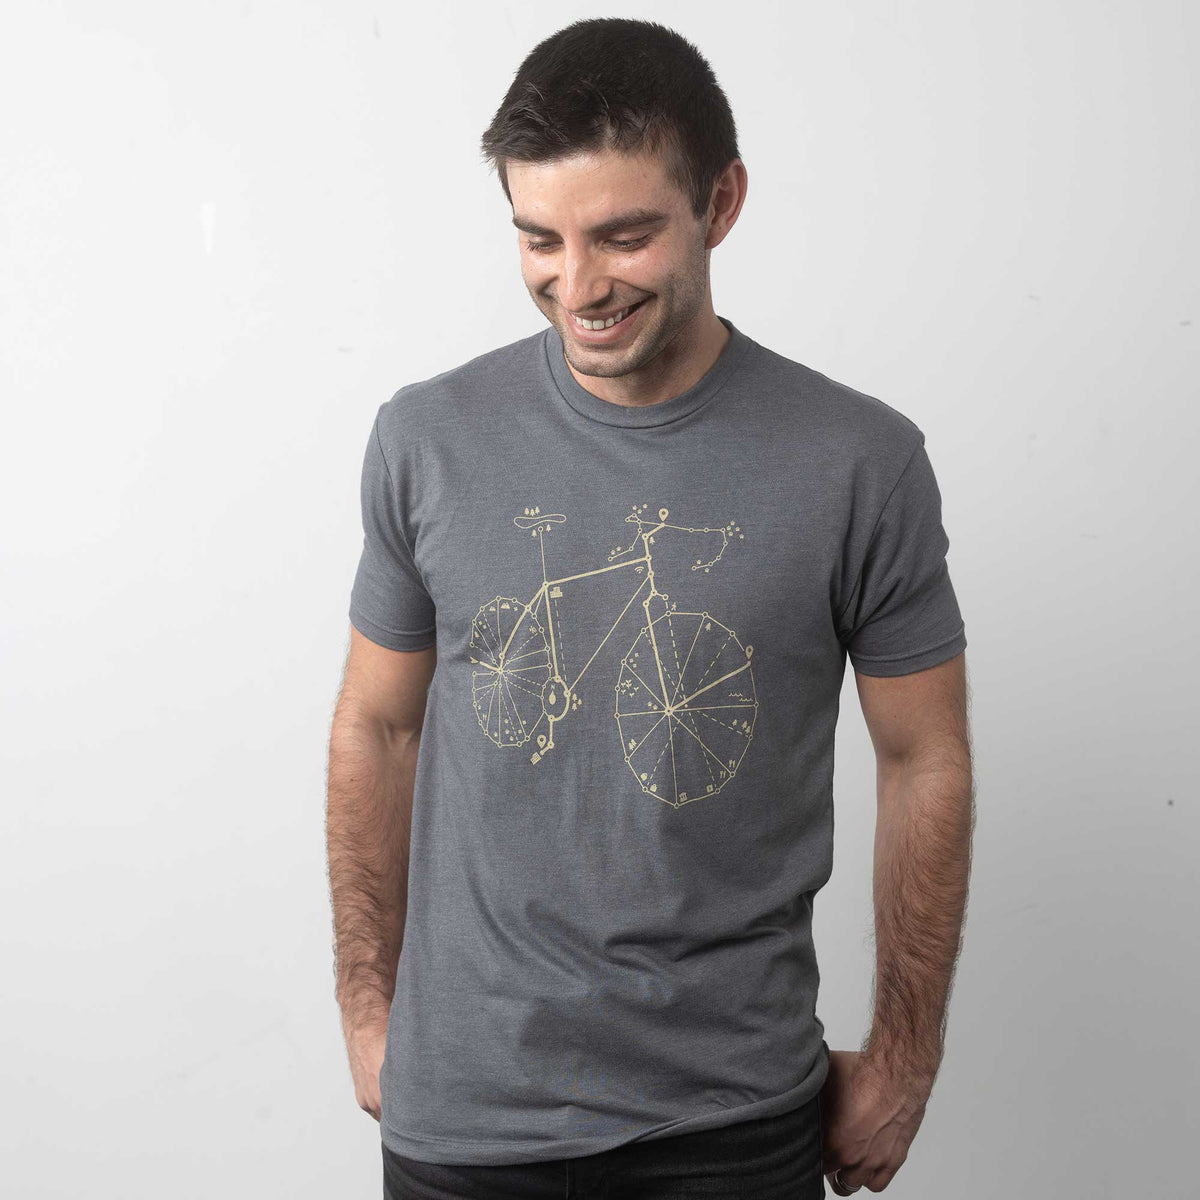 Pathfinder T-shirt by STORY SPARK